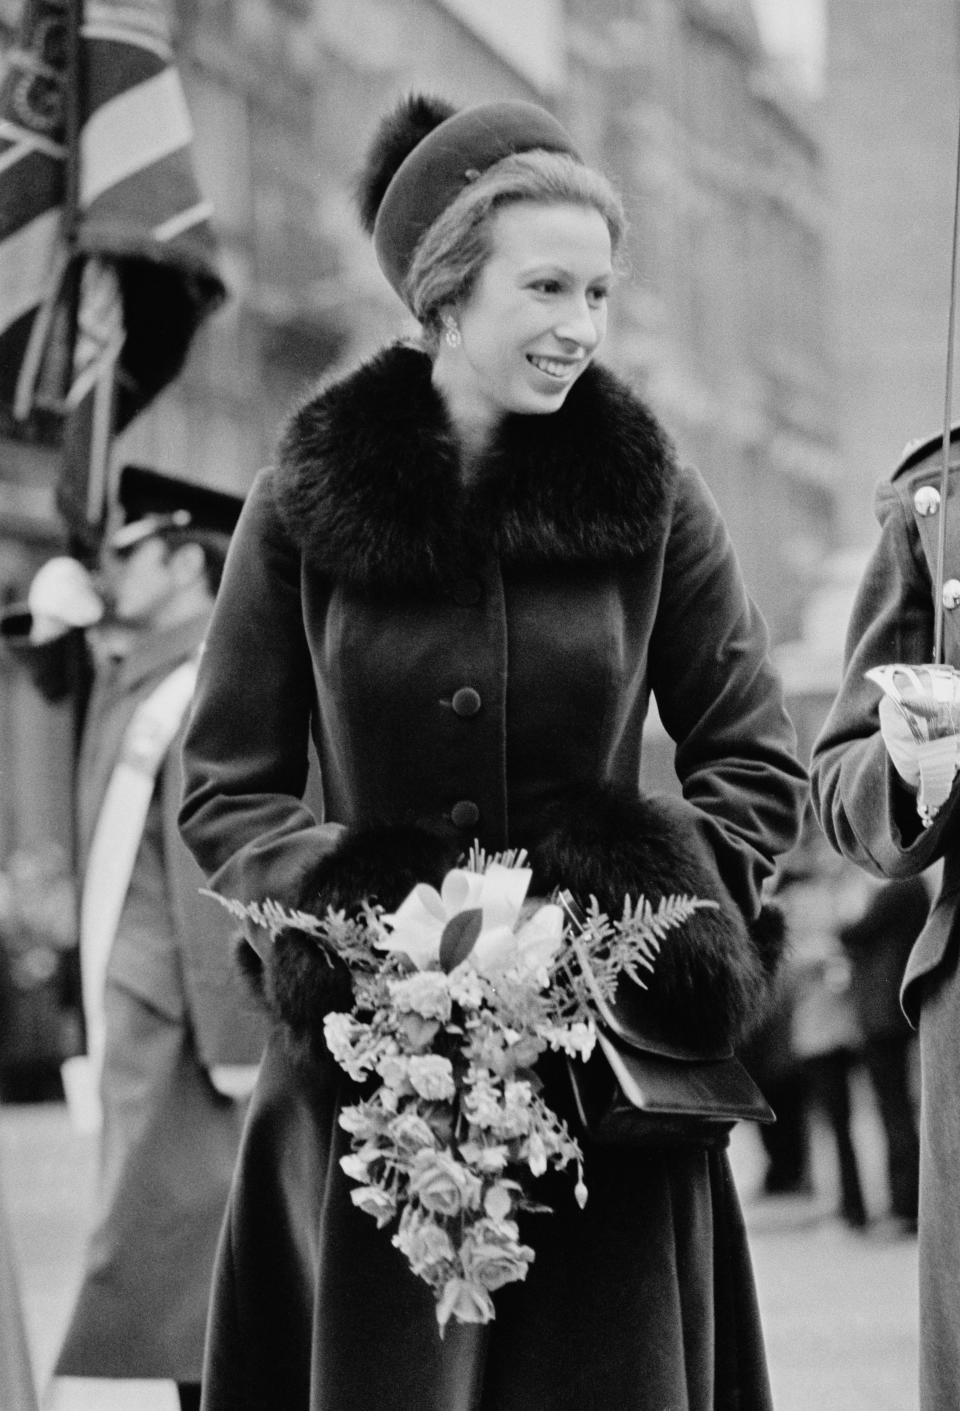 Princess Anne, attends a formal event wearing long coat with fur details in 1976. (Getty Images)